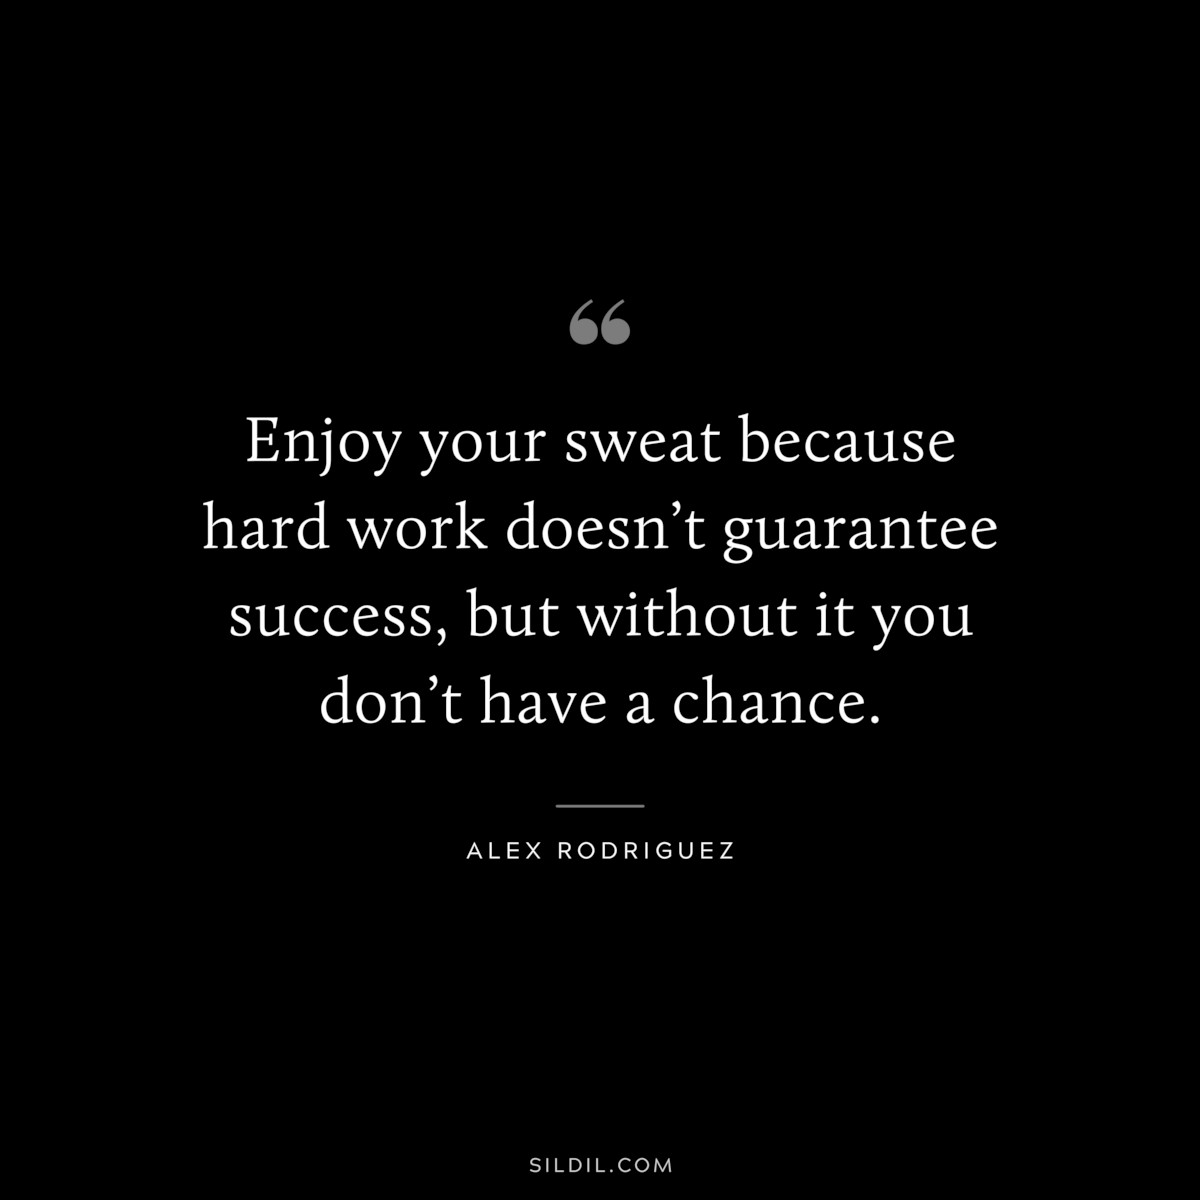 Enjoy your sweat because hard work doesn’t guarantee success, but without it you don’t have a chance. ― Alex Rodriguez